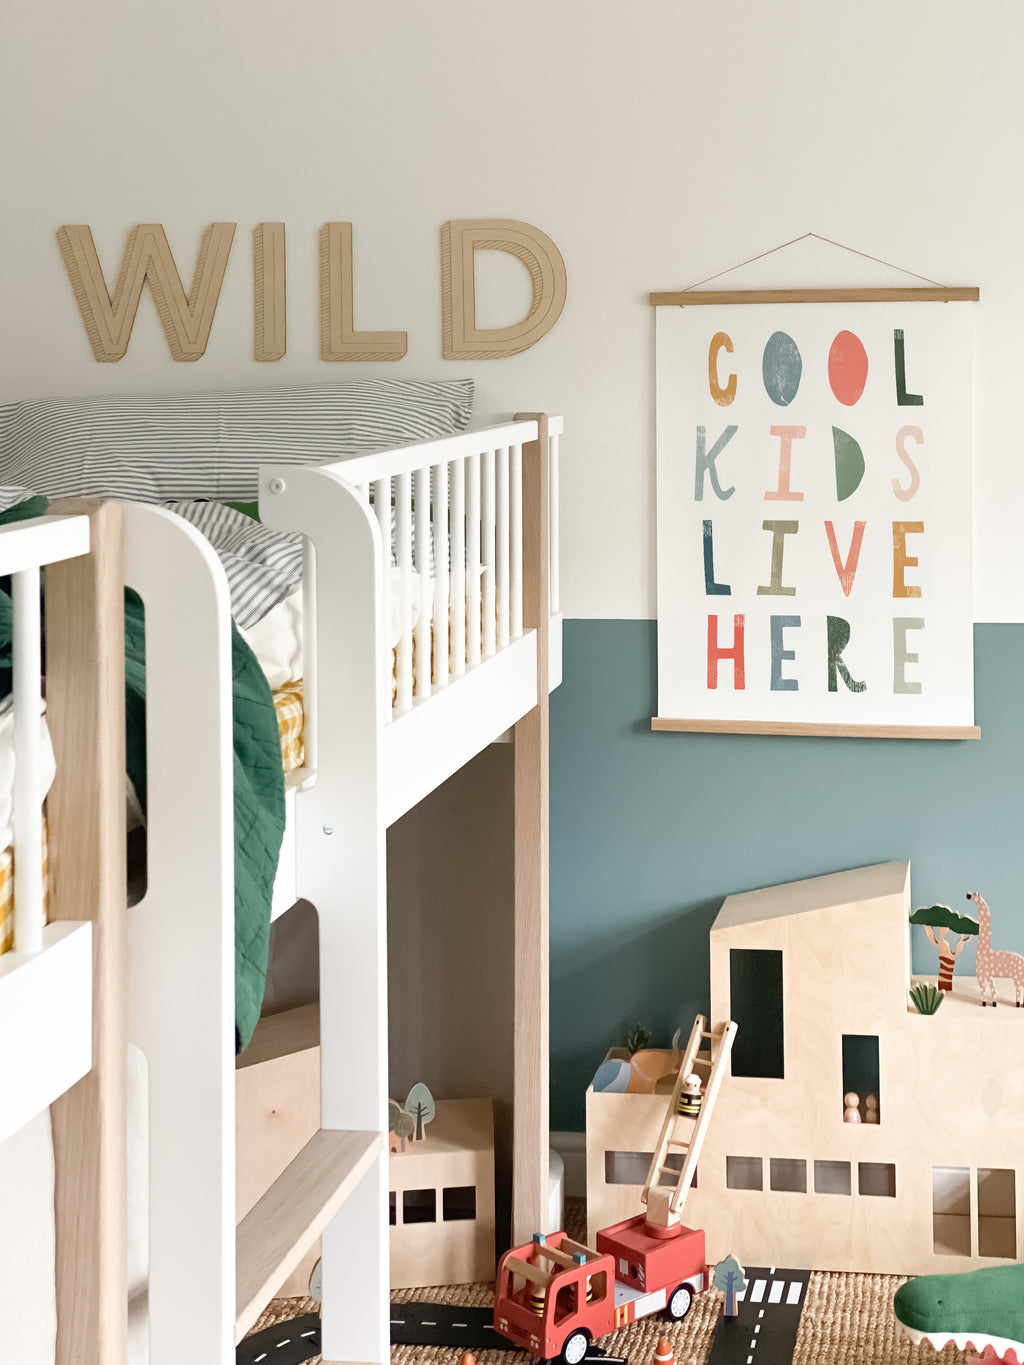 Cool Kids Live Here - Space Colours |  Fine Art Print